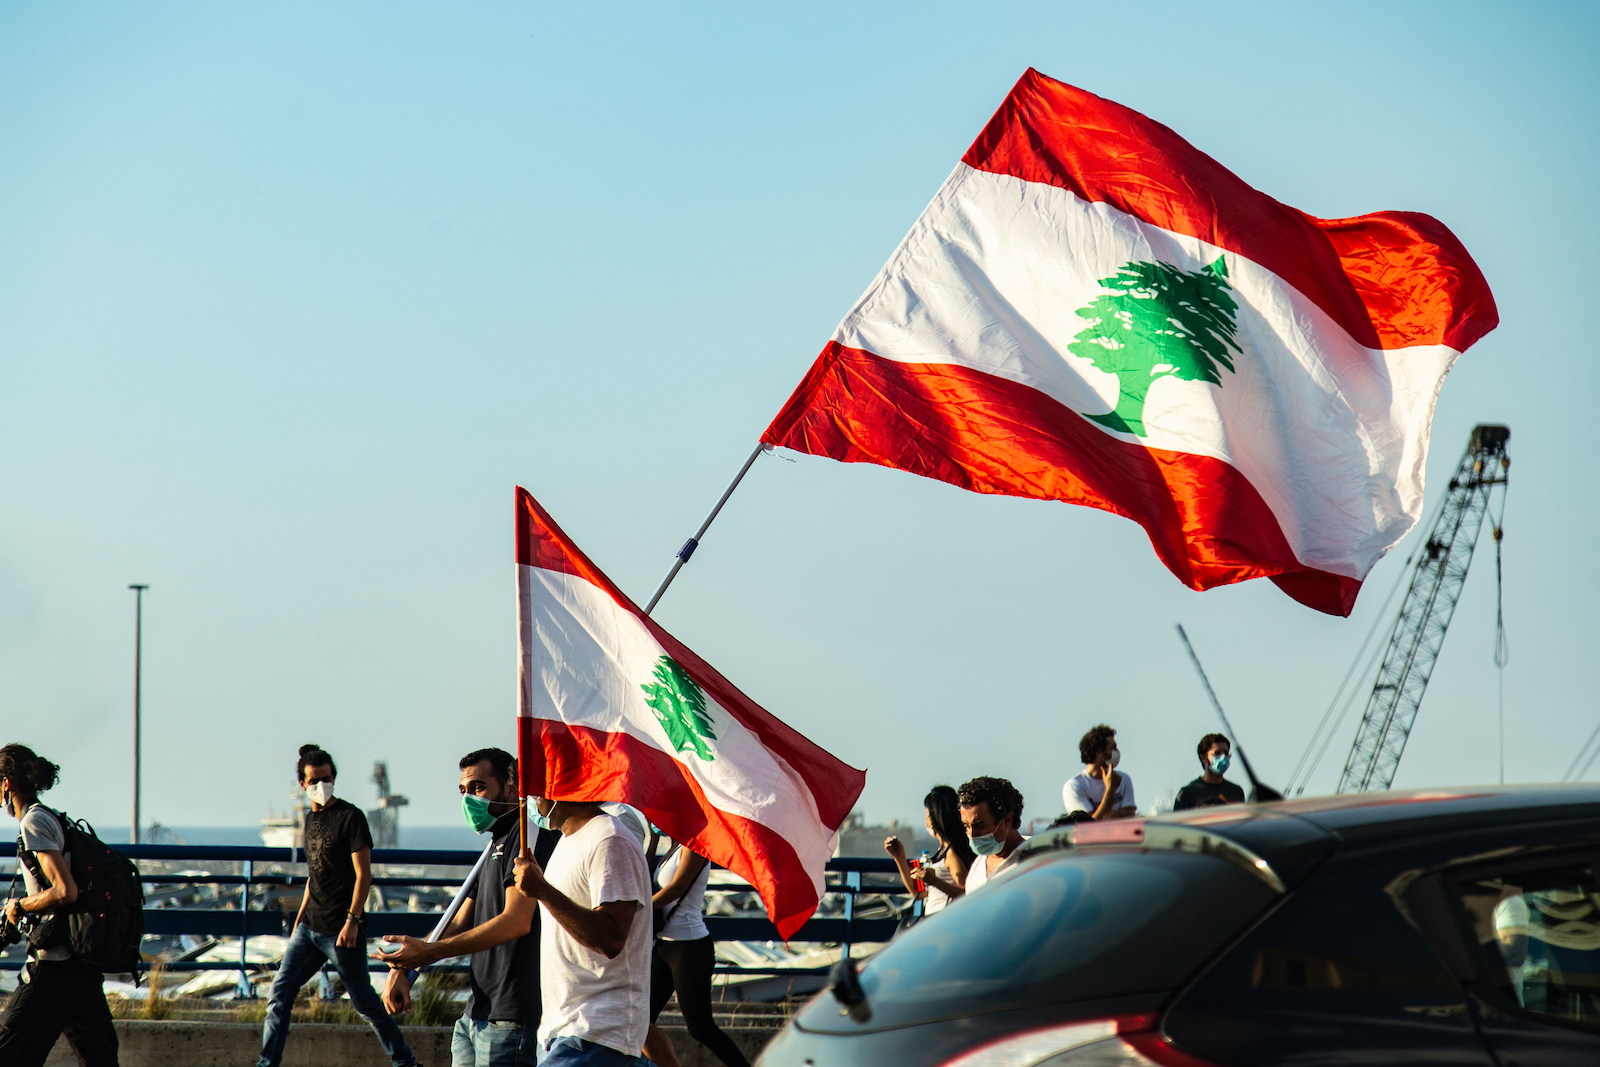 Protestors commemorating the 2020 Beirut explosion